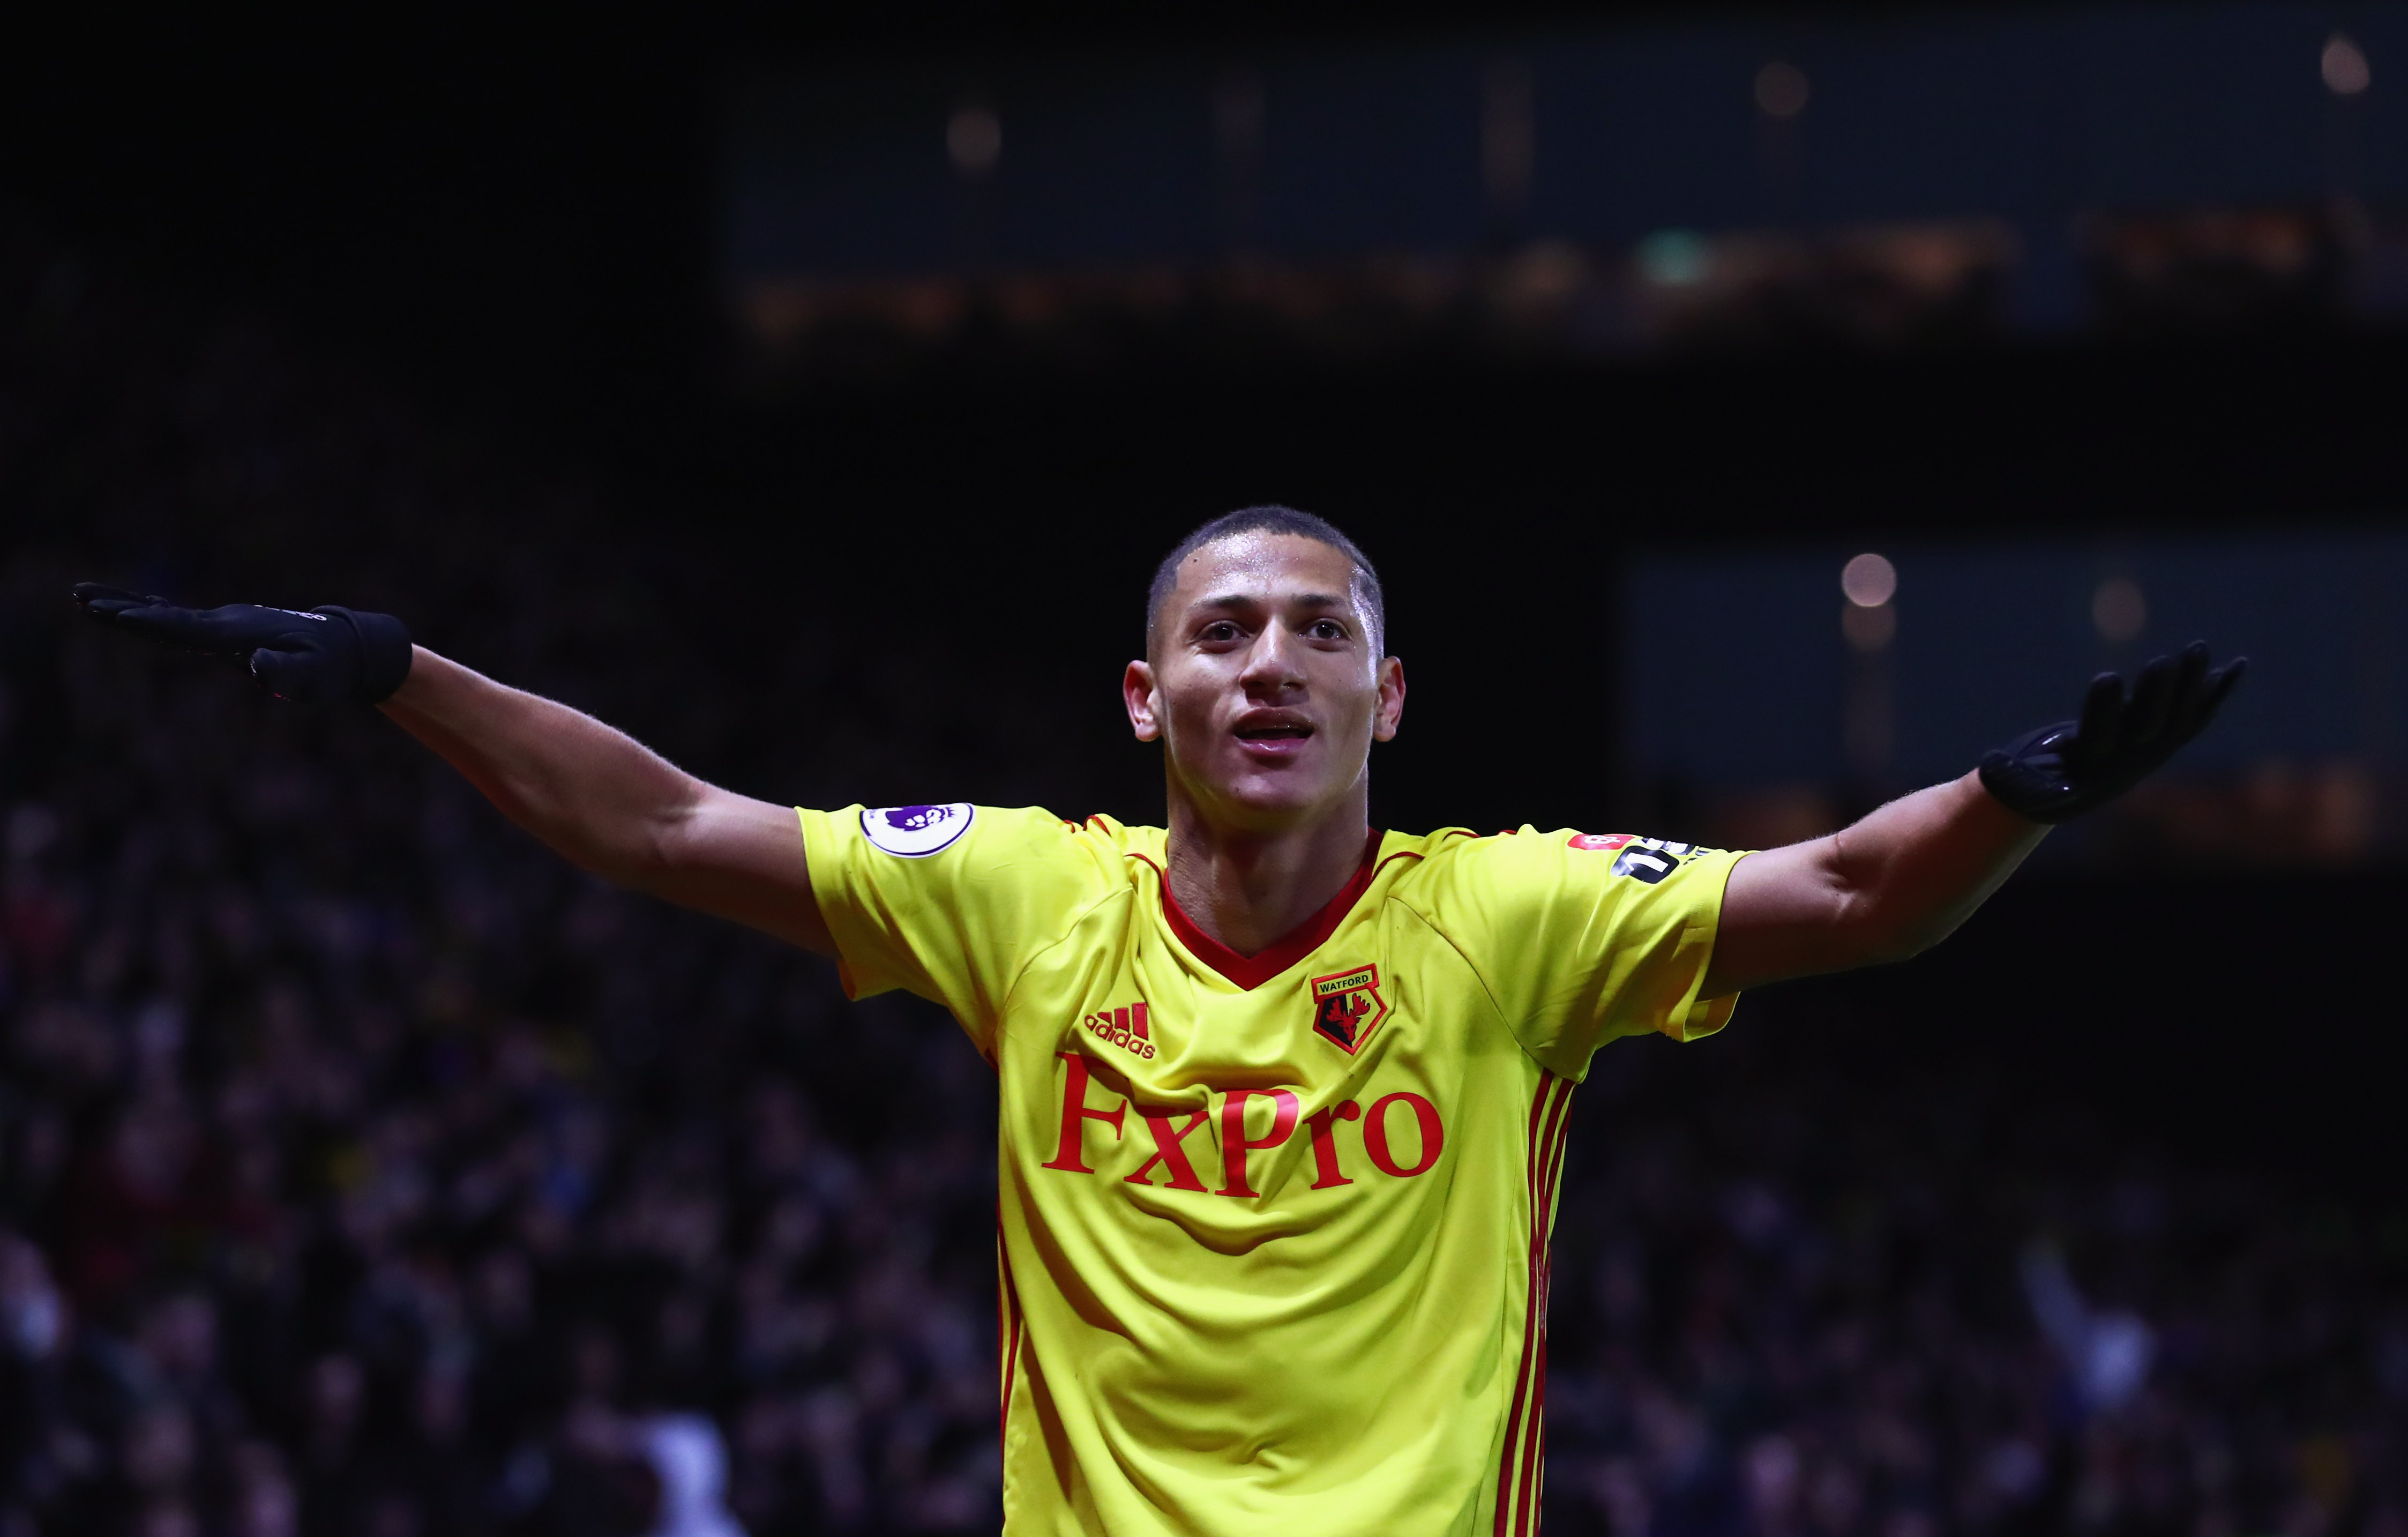 WATFORD, ENGLAND - NOVEMBER 19:  Richarlison de Andrade of Watford celebrates as he scores their second goal during the Premier League match between Watford and West Ham United at Vicarage Road on November 19, 2017 in Watford, England.  (Photo by Clive Rose/Getty Images)